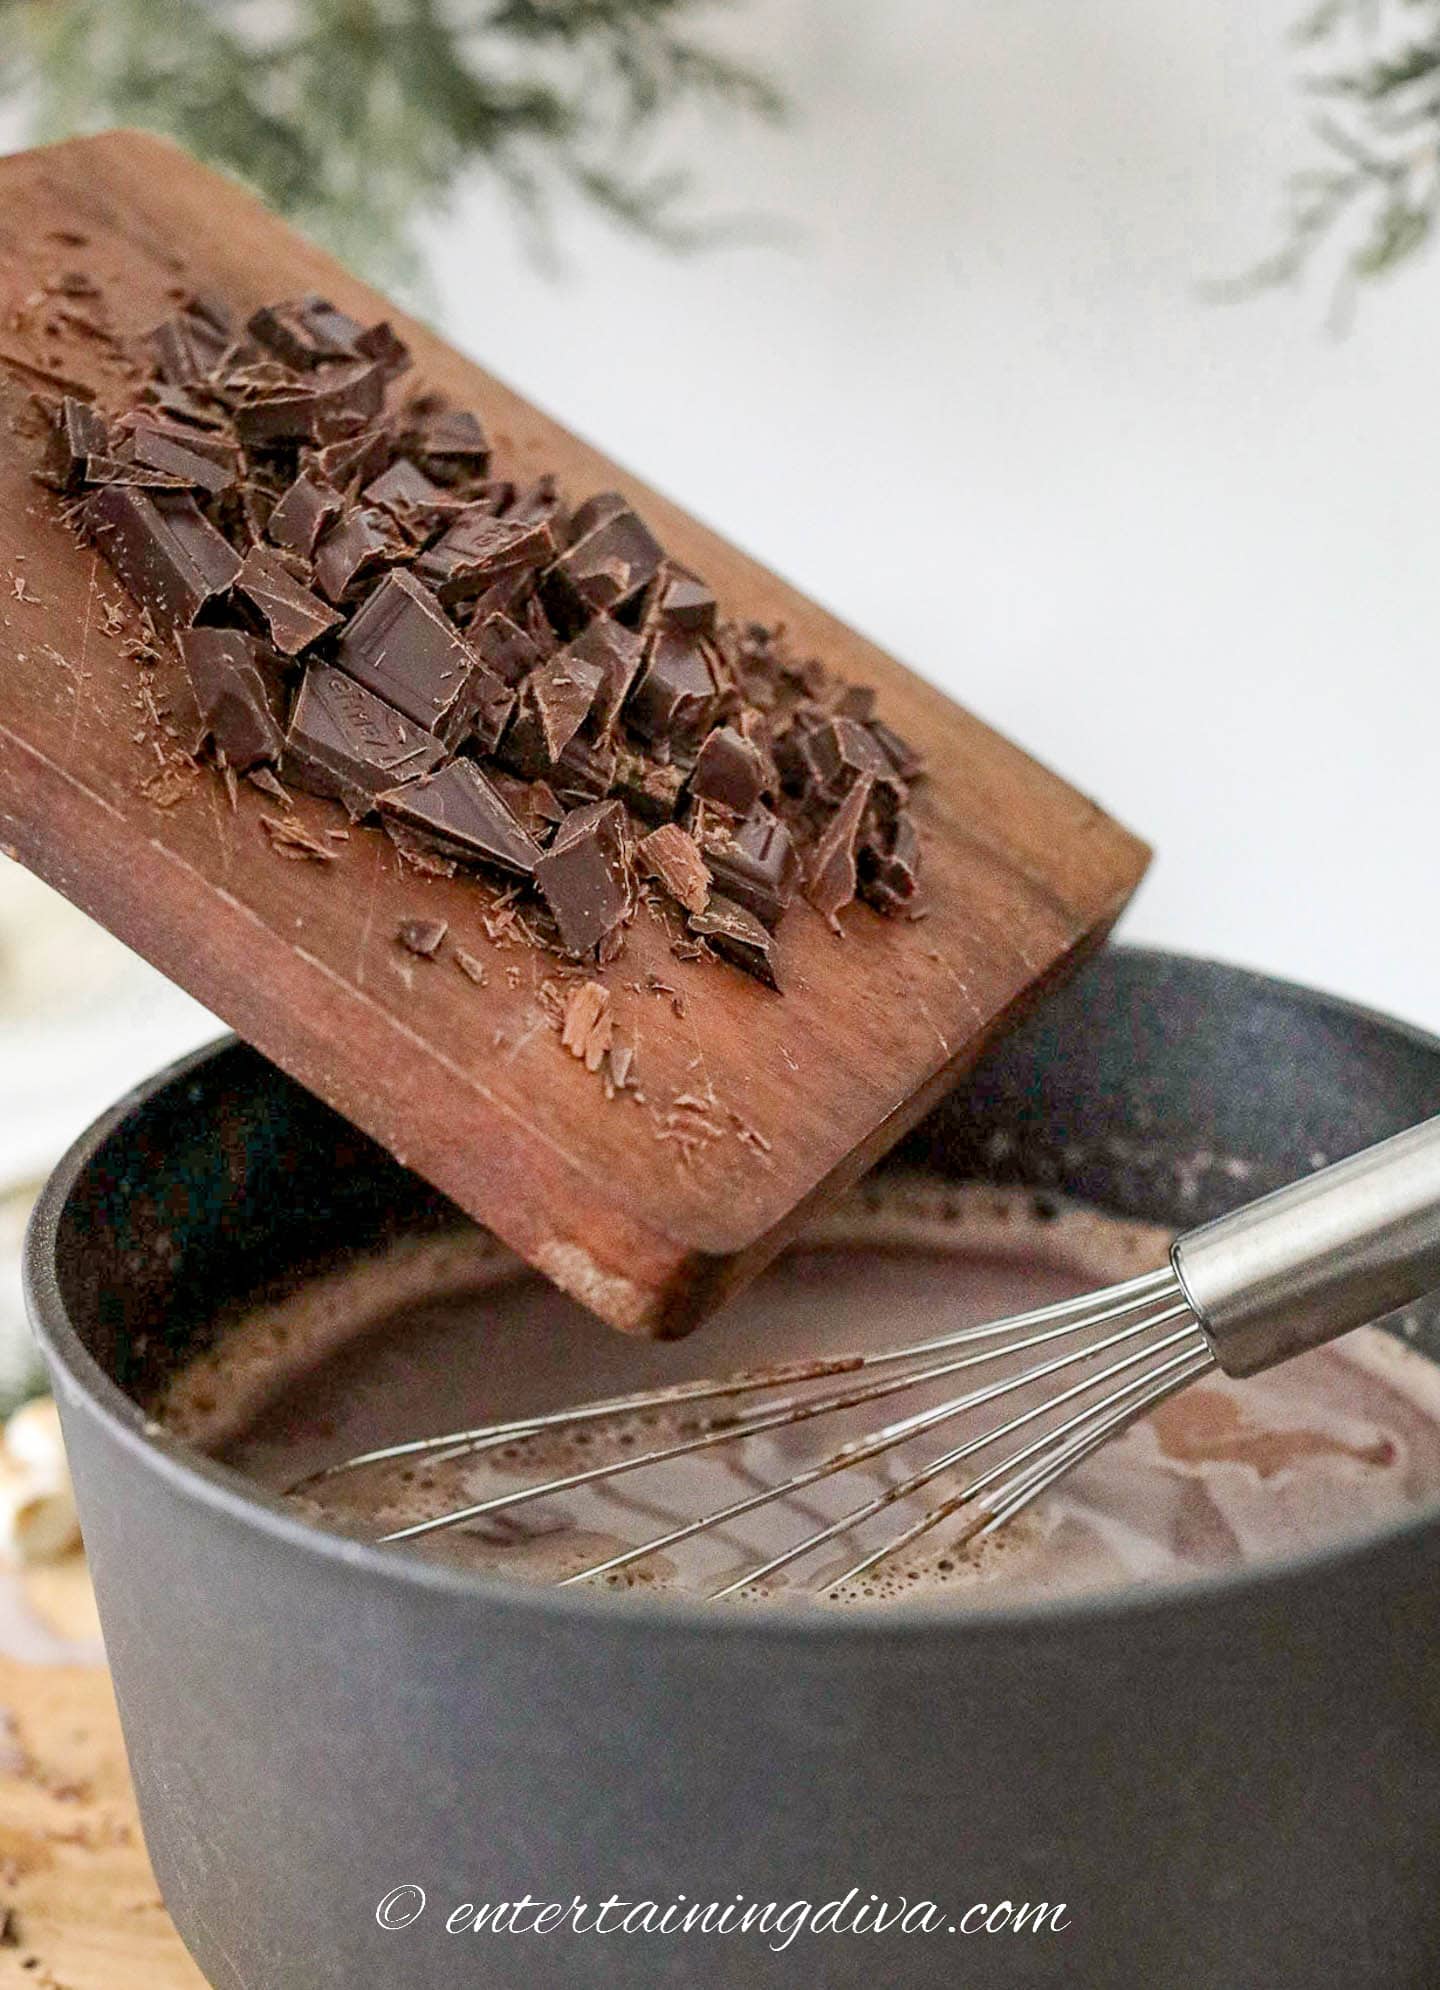 Chopped chocolate being poured into a pot of hot cocoa